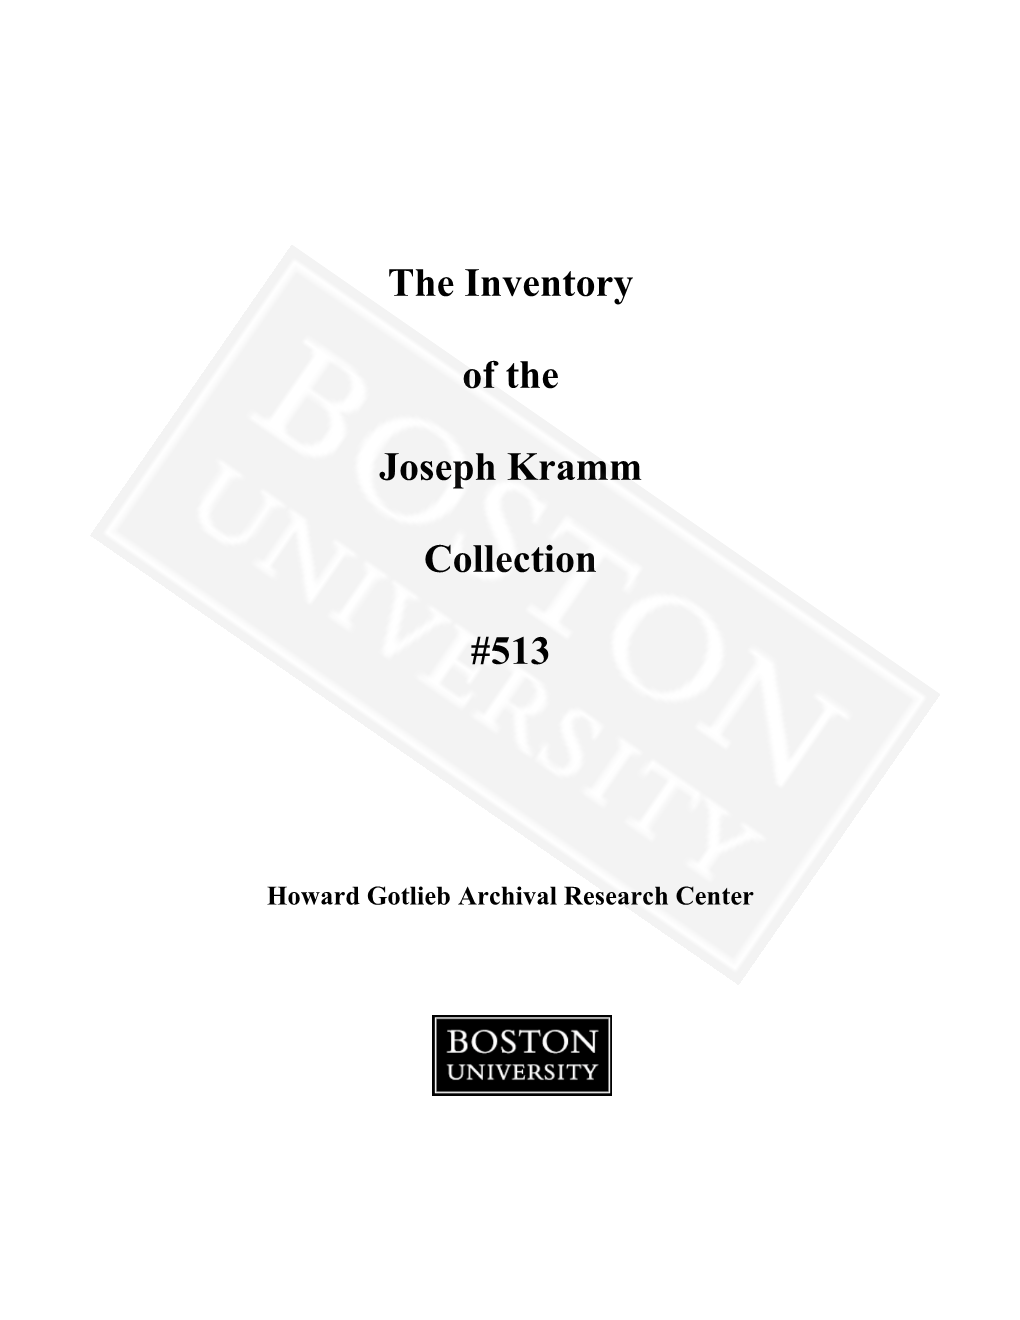 The Inventory of the Joseph Kramm Collection #513